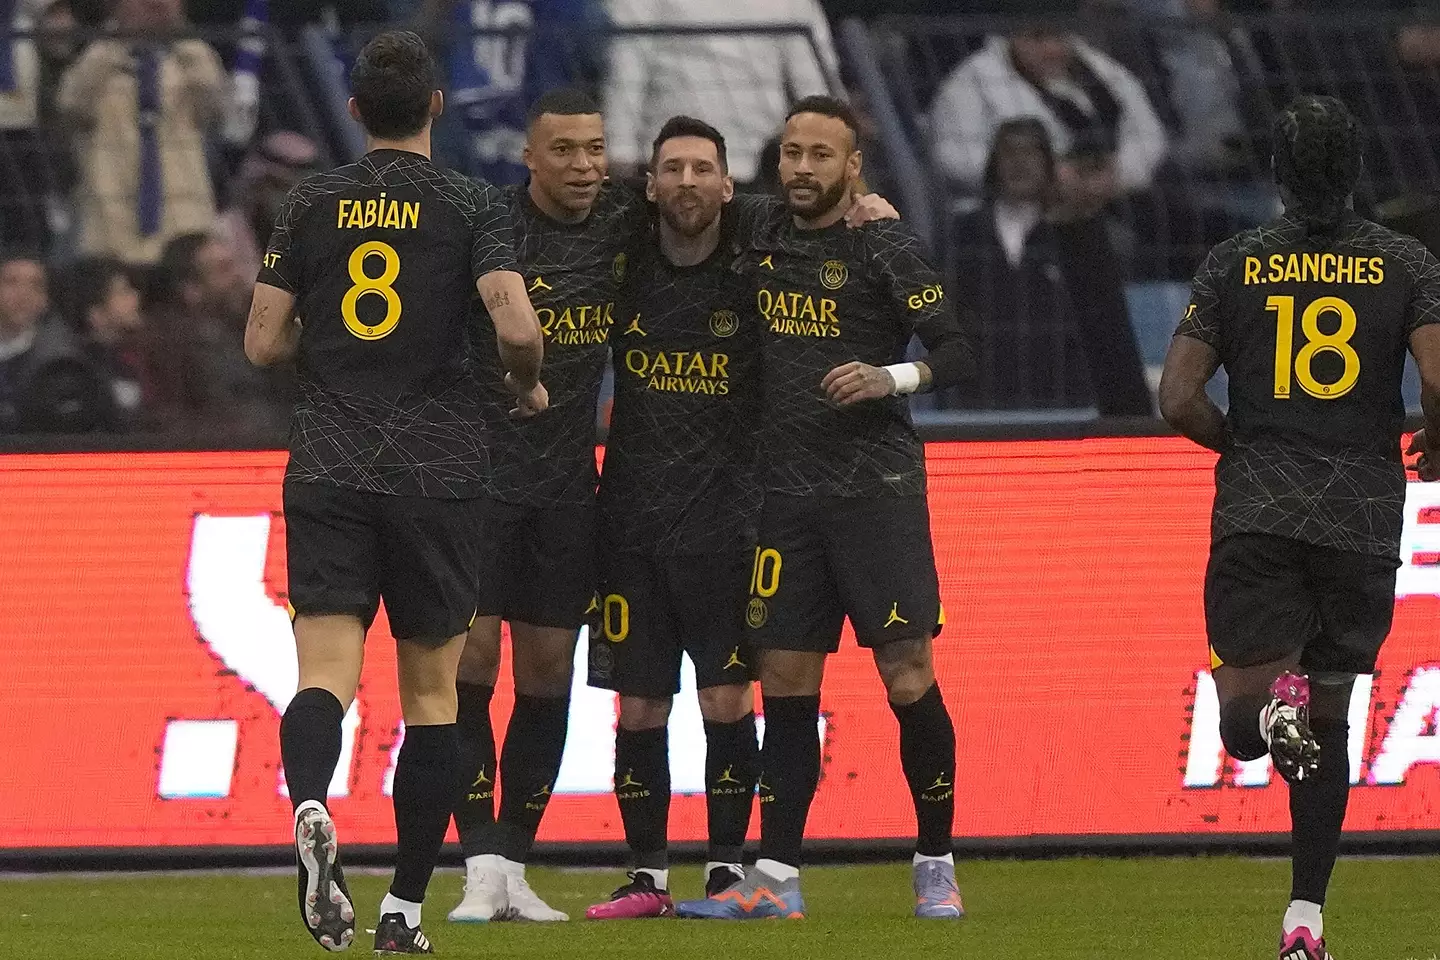 Lionel Messi, Kylian Mbappe and Neymar were all on the scoresheet for PSG. (